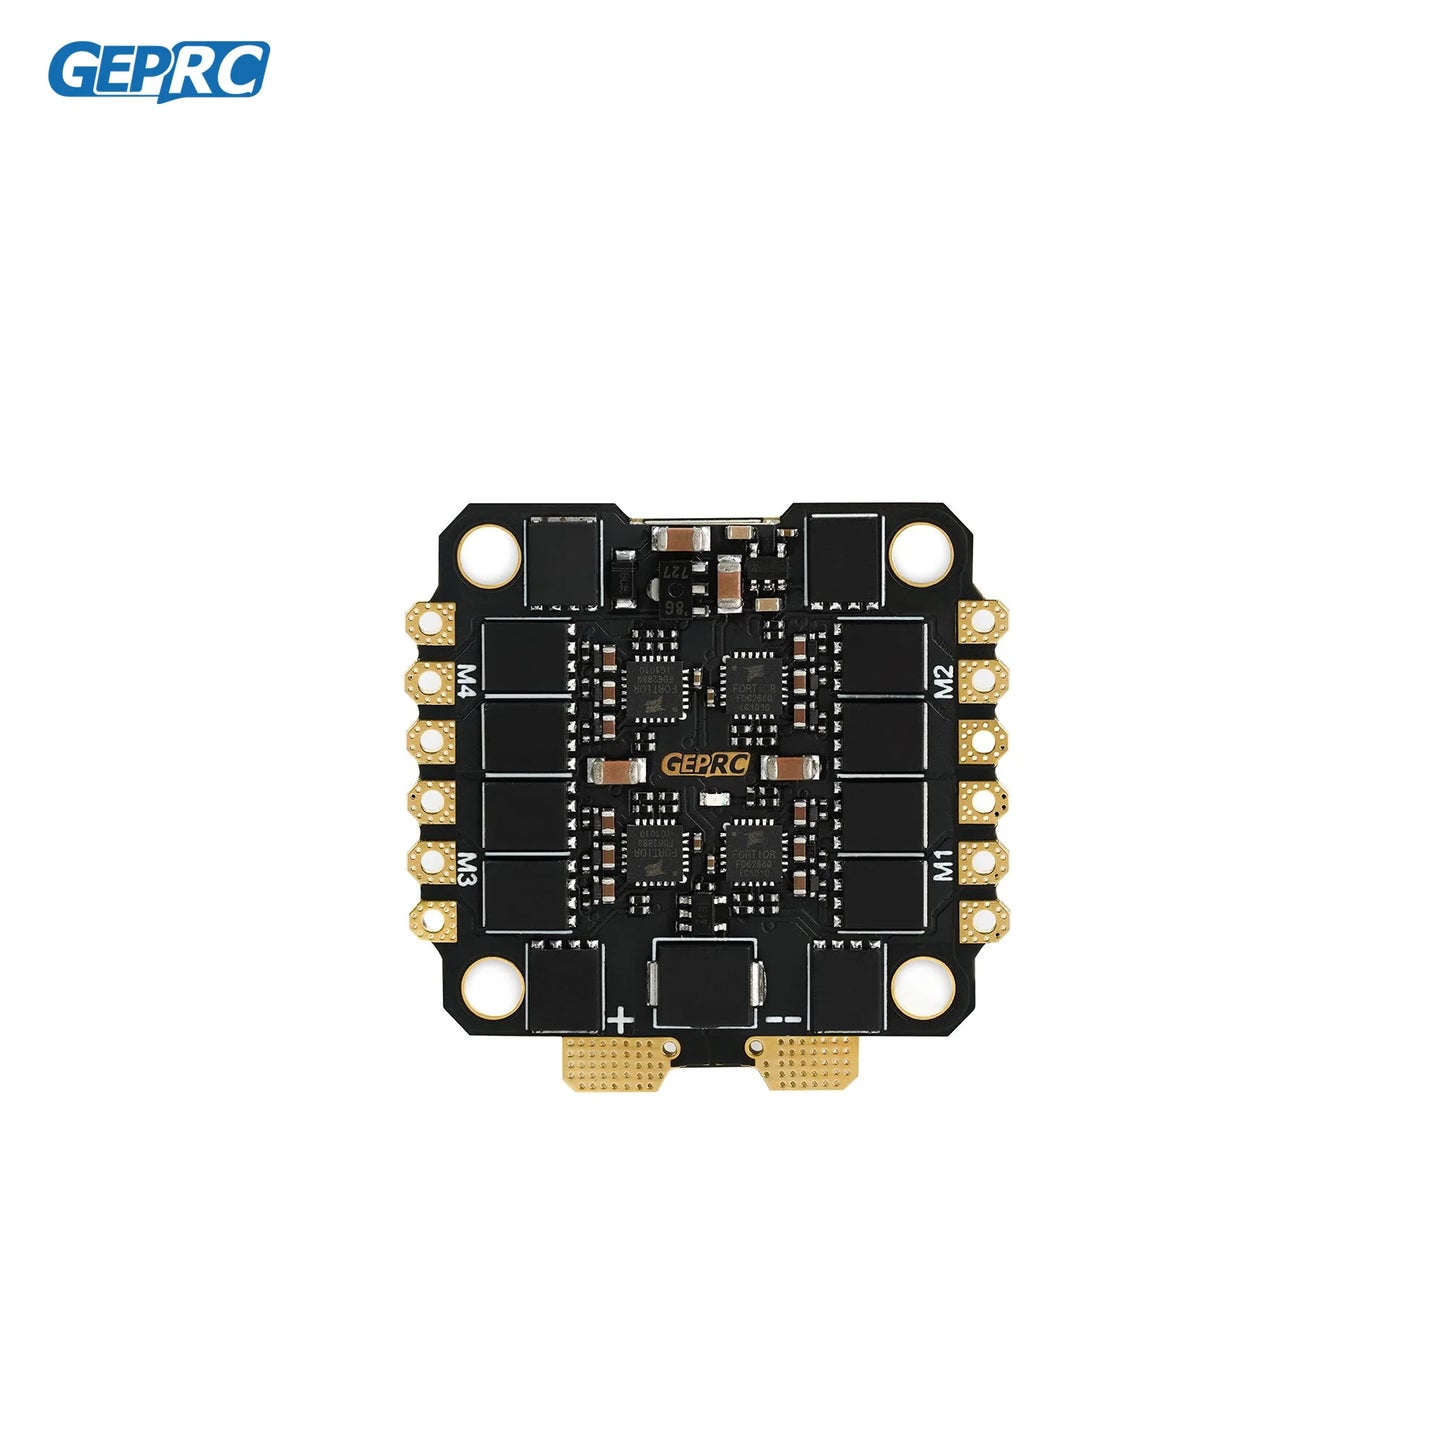 GEPRC GEP-BL32 50A 96K 4IN1 ESC - Support Play Racing FPV Drone RC FPV Transmitter Multicopter Attachment